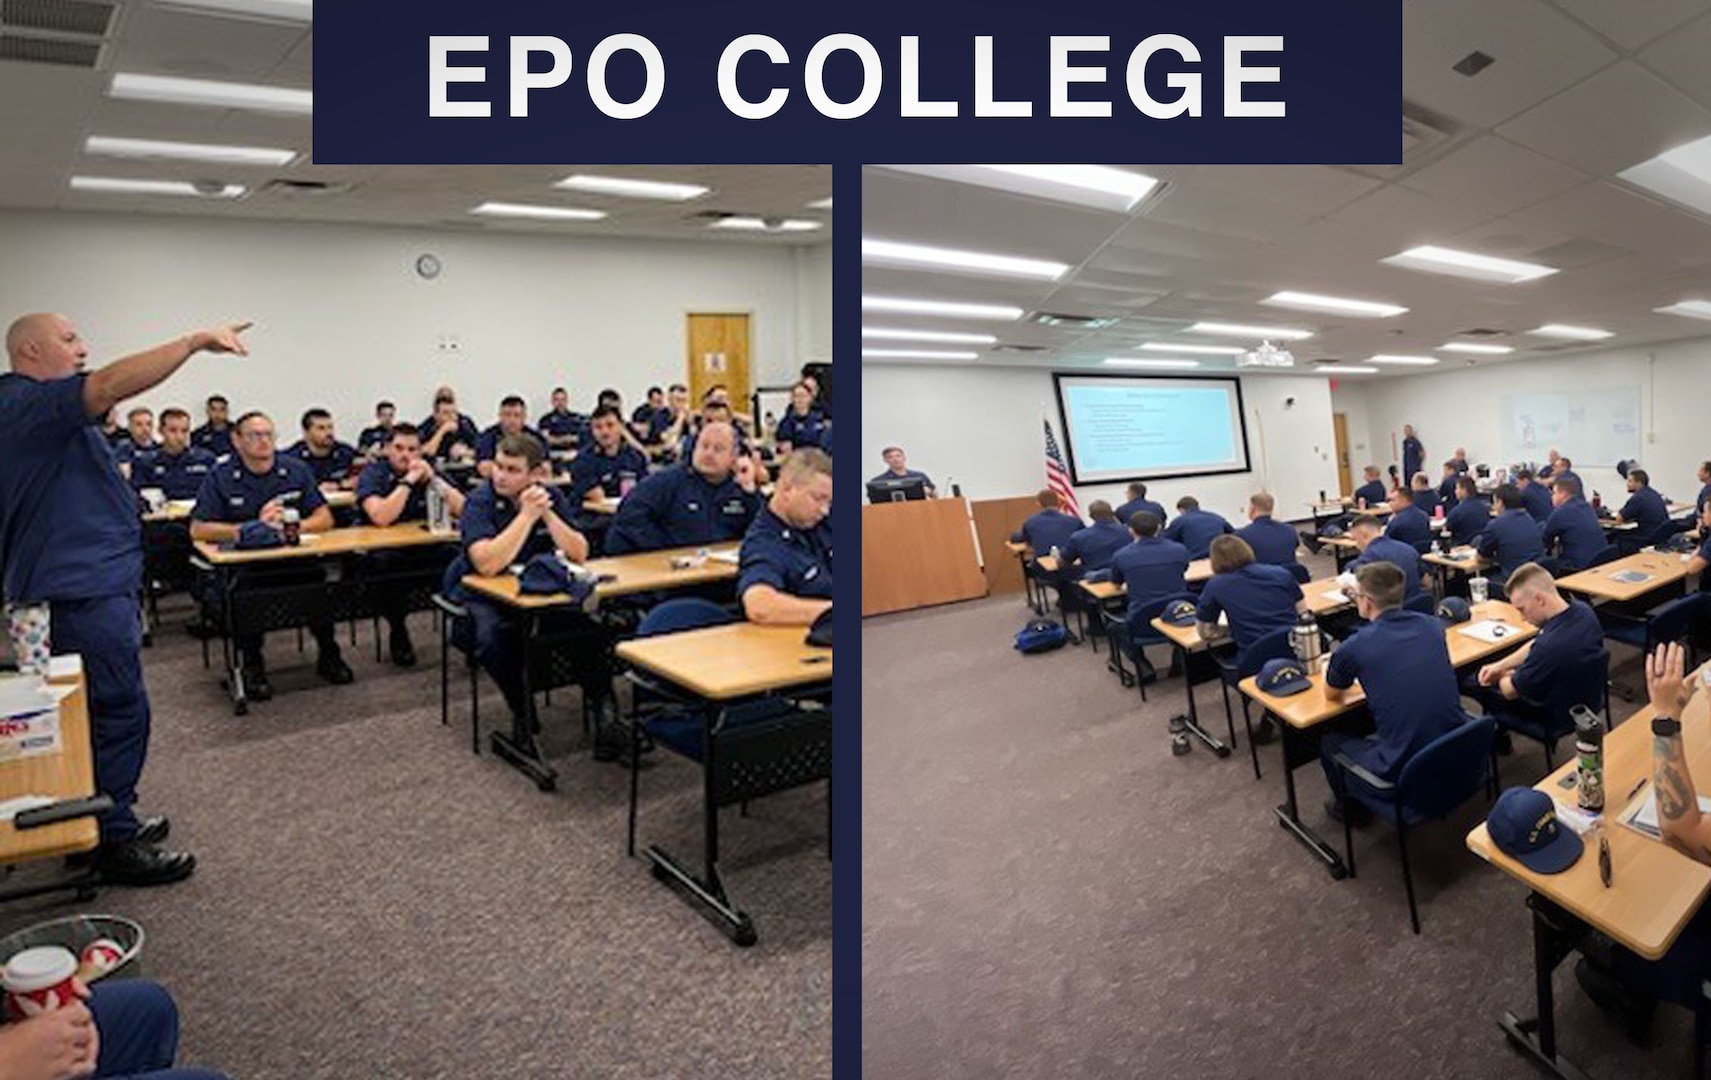 Members of D5 attend EPO College.